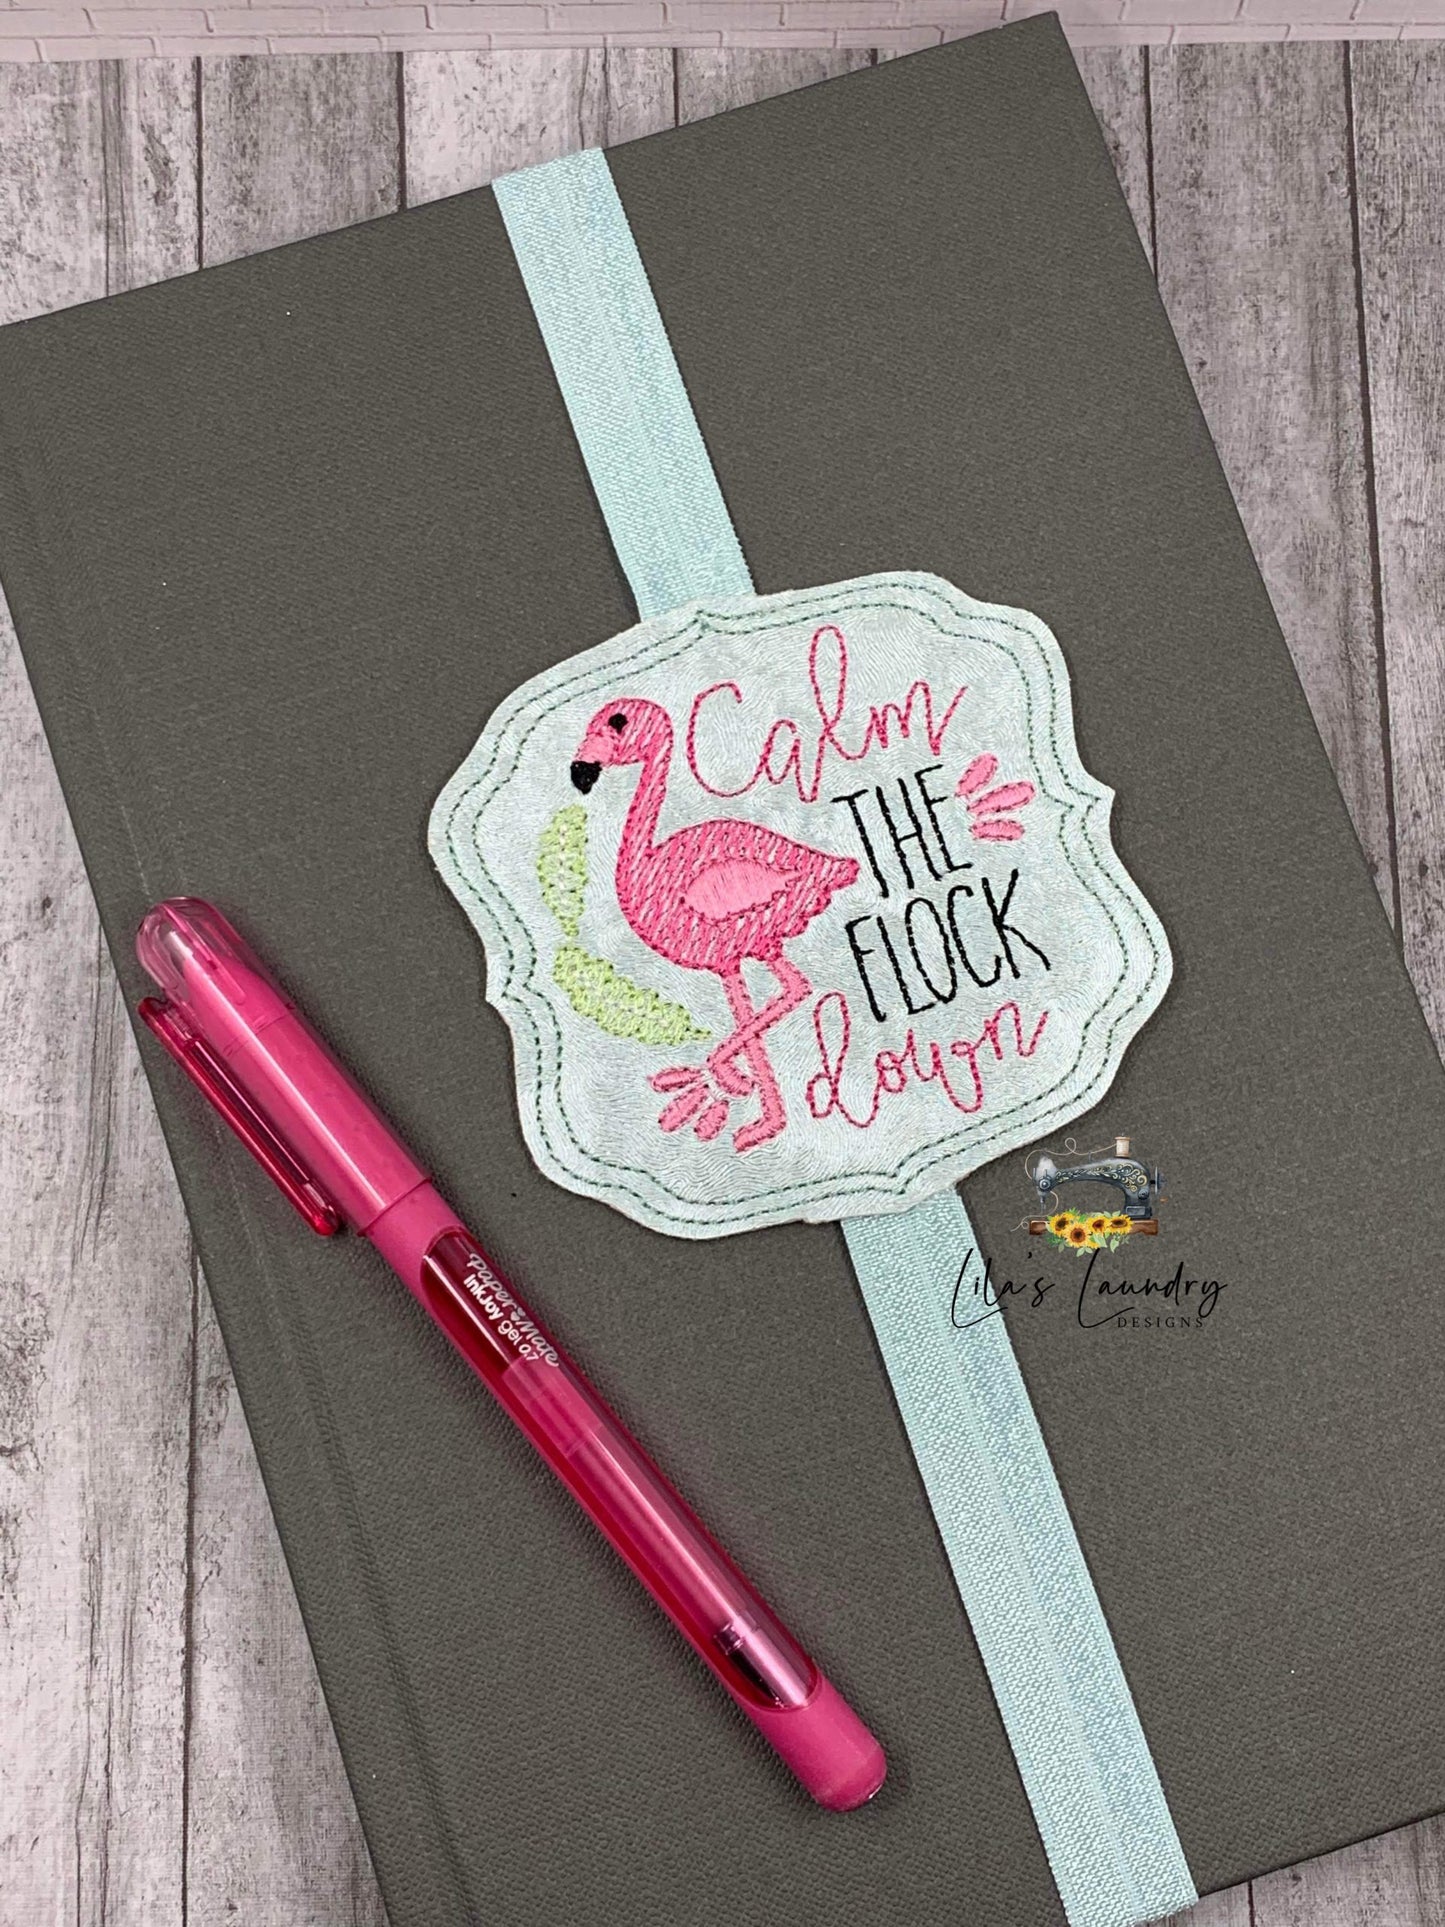 Calm the Flock Down Book Band - Embroidery Design, Digital File